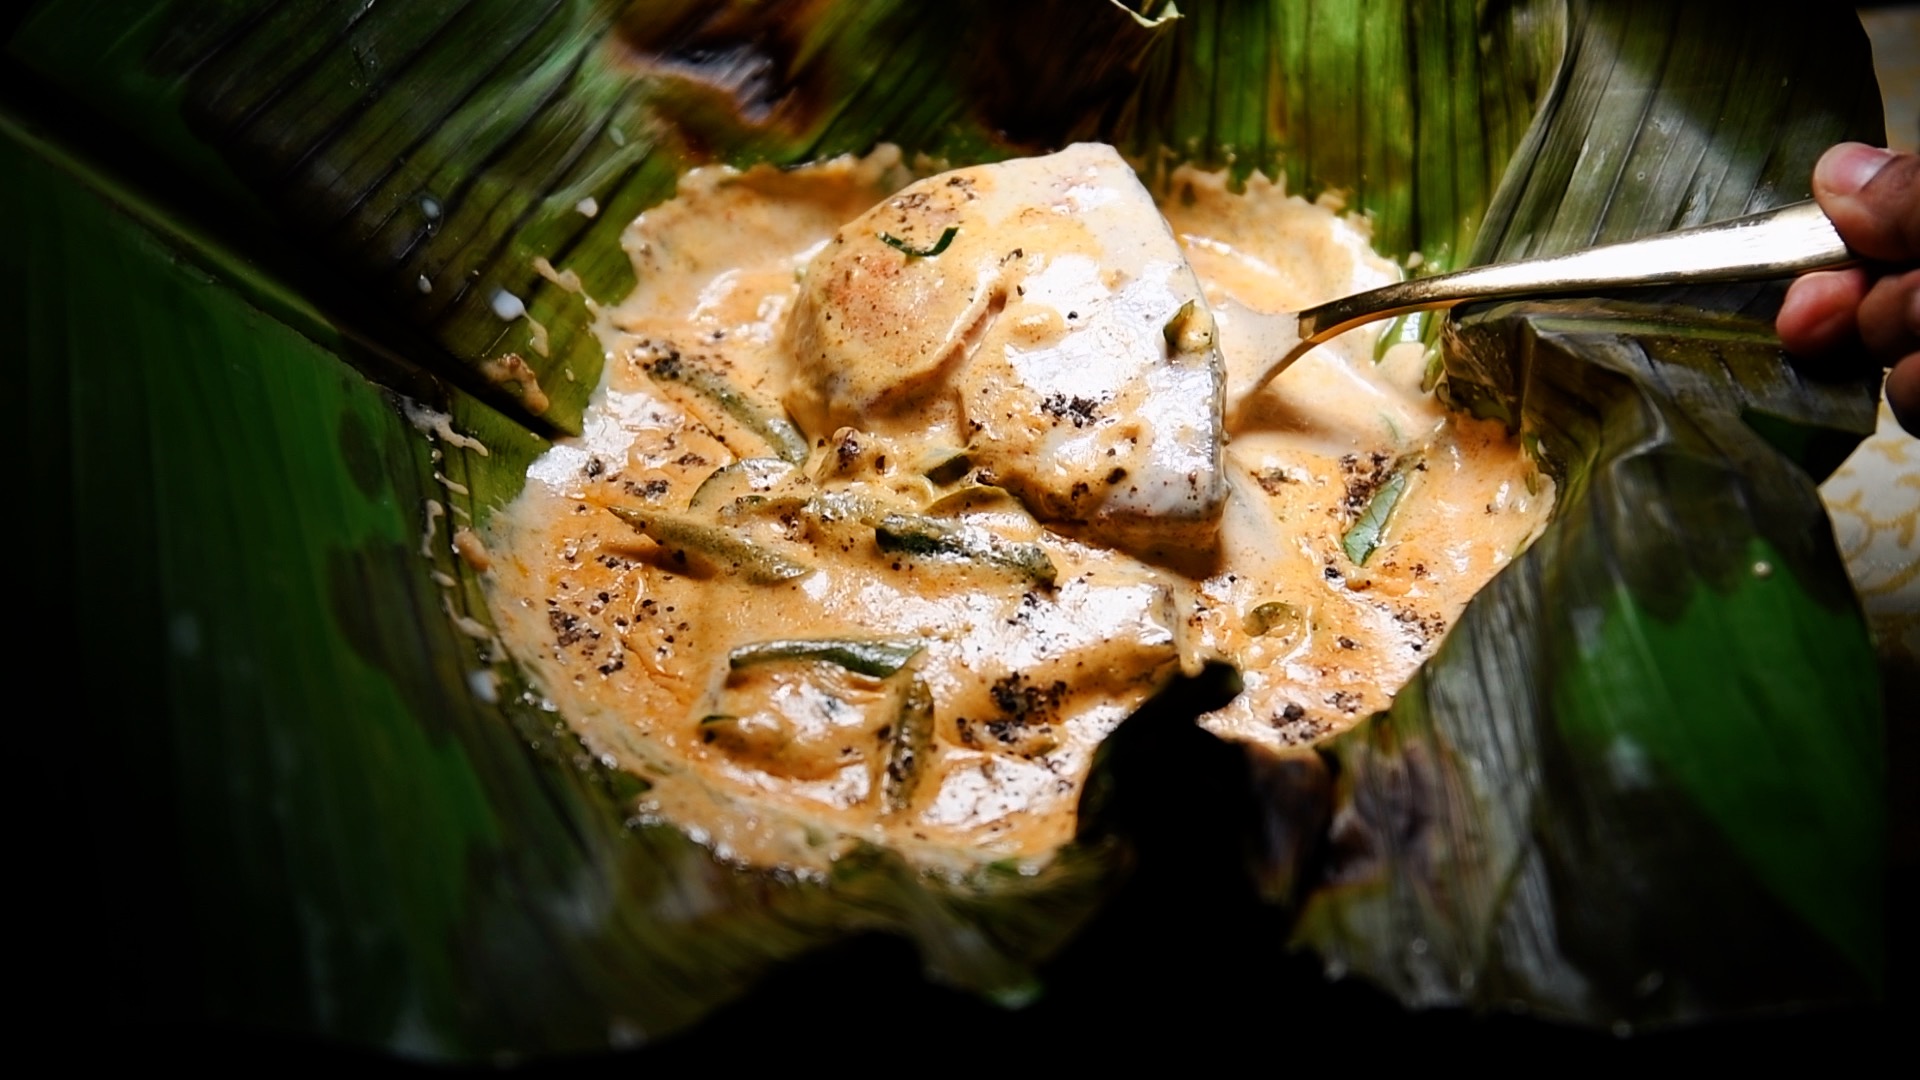 Want to try the famous Fish Nirvana? Head to Kochi's Restaurant Chef Pillai